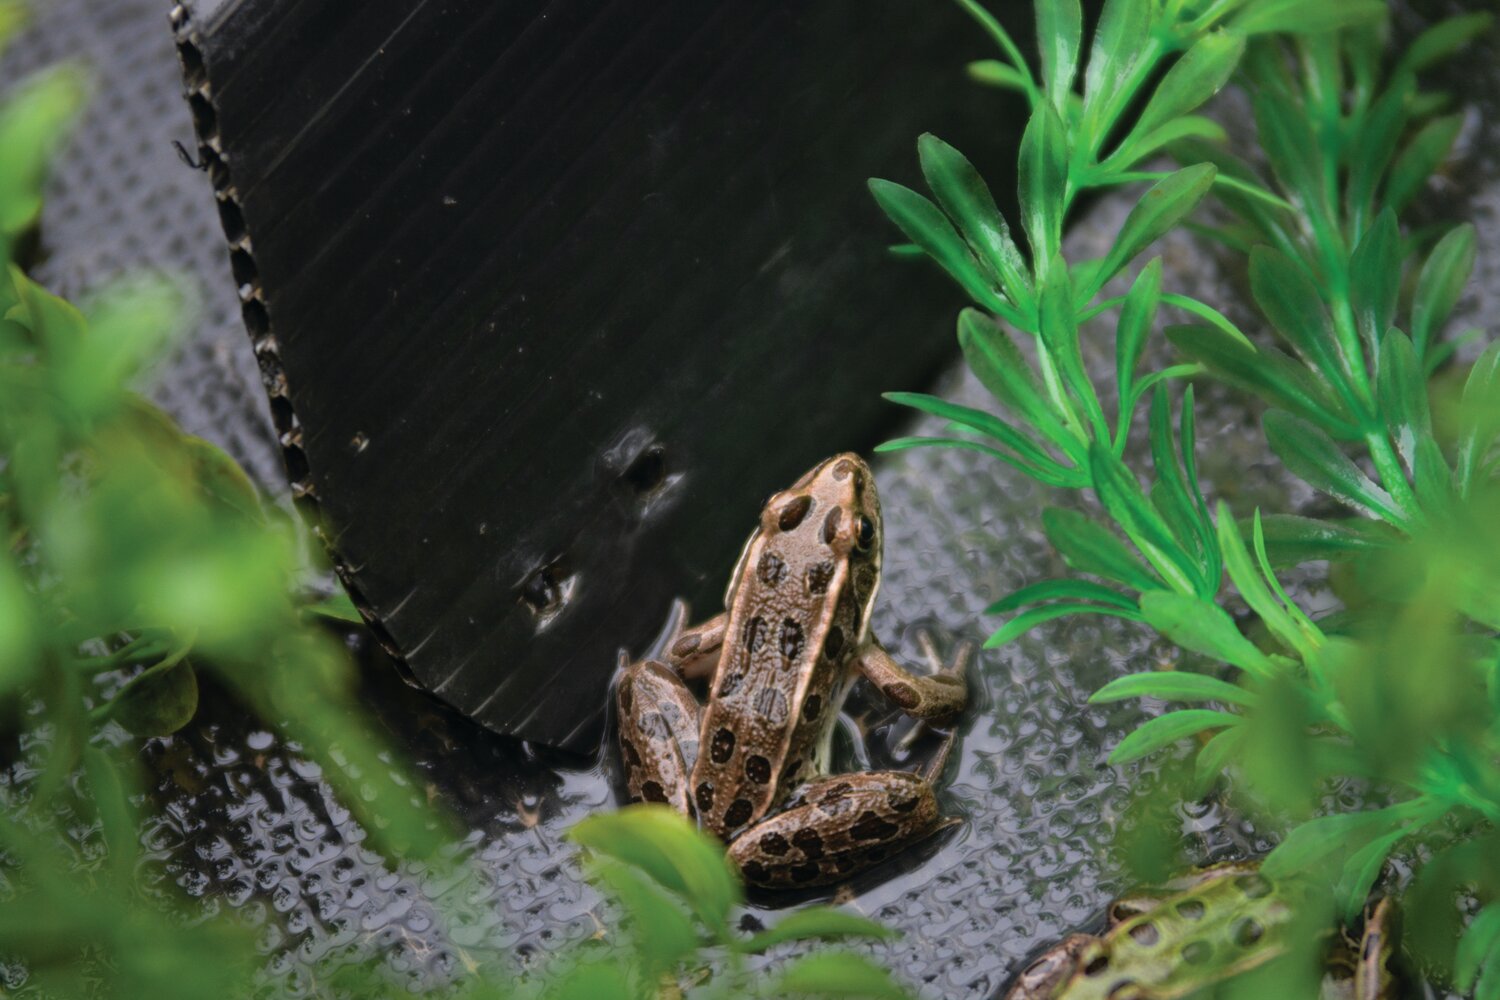 The northern leopard frog, photographed on Aug. 9 at Northwest Trek in Eatonville, is an endangered species of frog, and has been rapidly disapearing from native ranges in Washington, Oregon and western Canada in recent years.